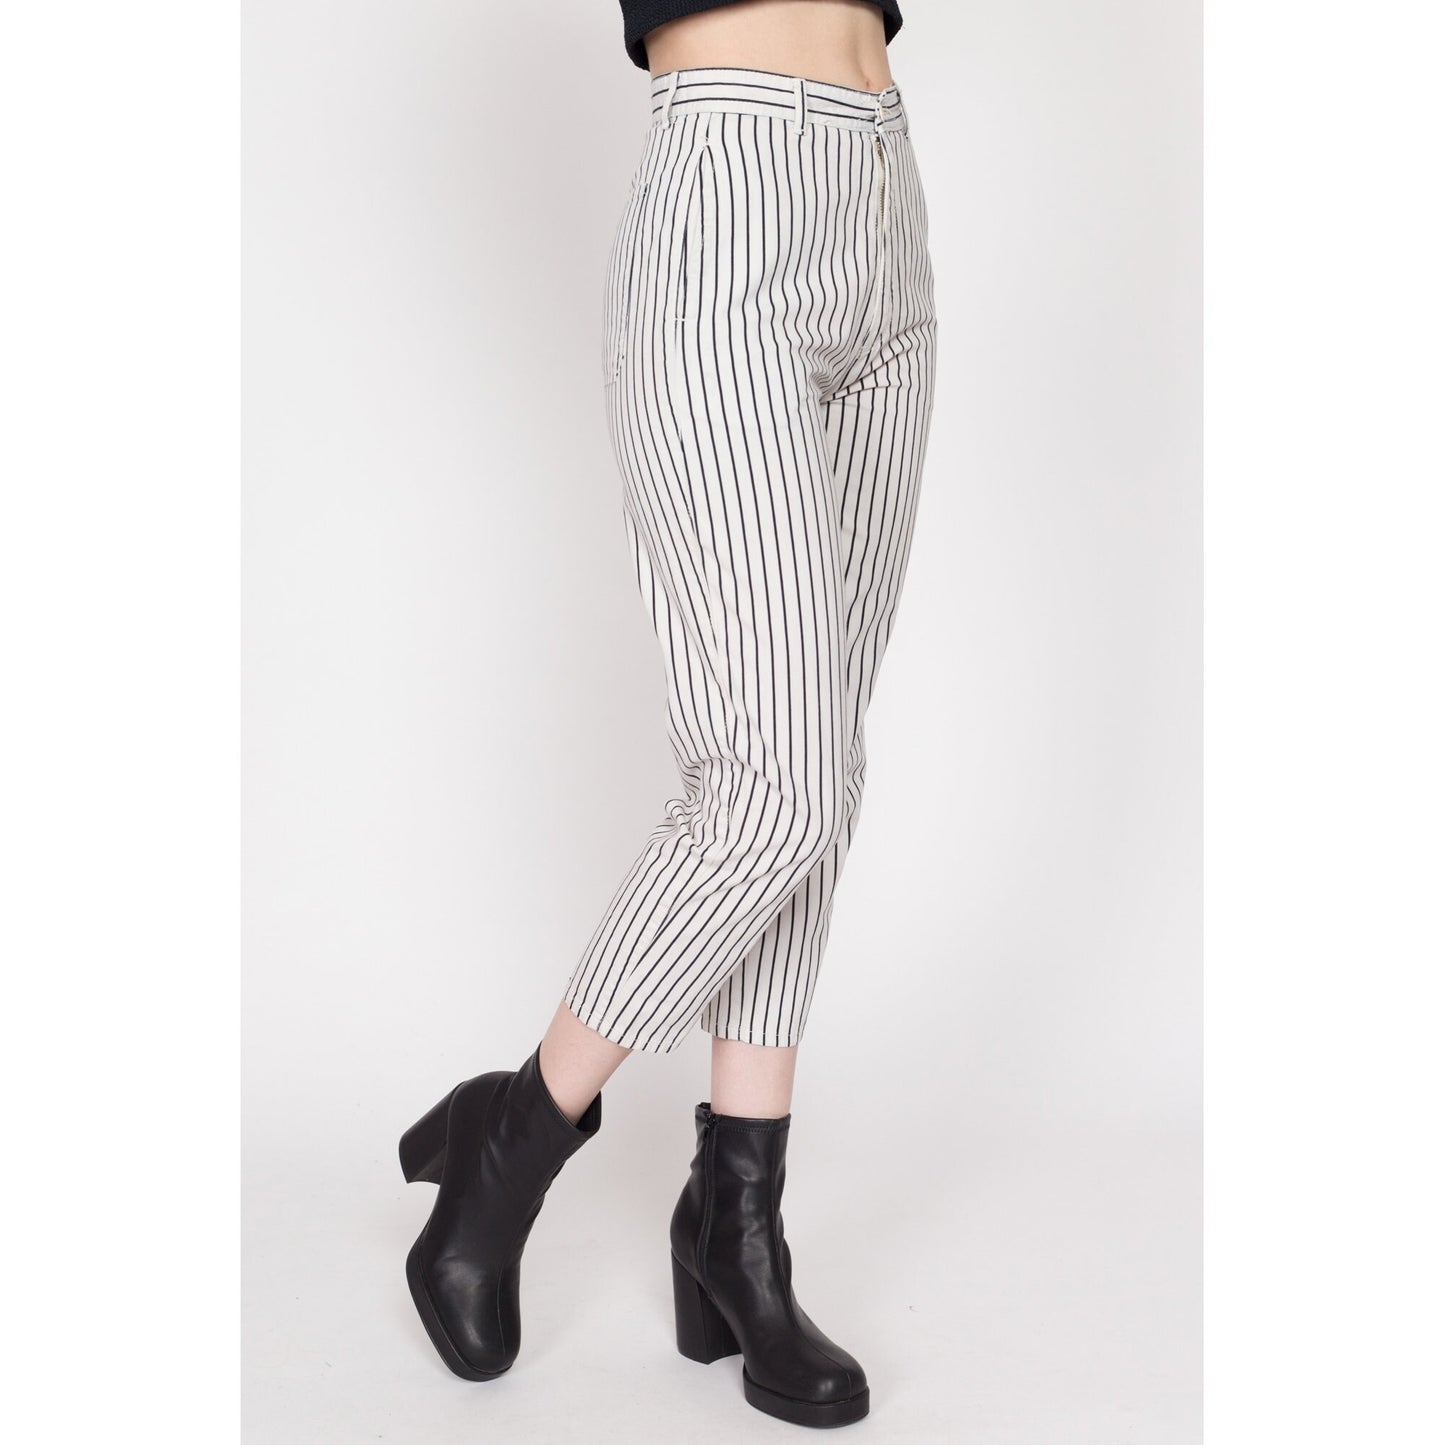 XS 80s Esprit Sport Black & White Striped Ankle Pants 25" | Vintage High Waisted Tapered Leg Cotton Trousers